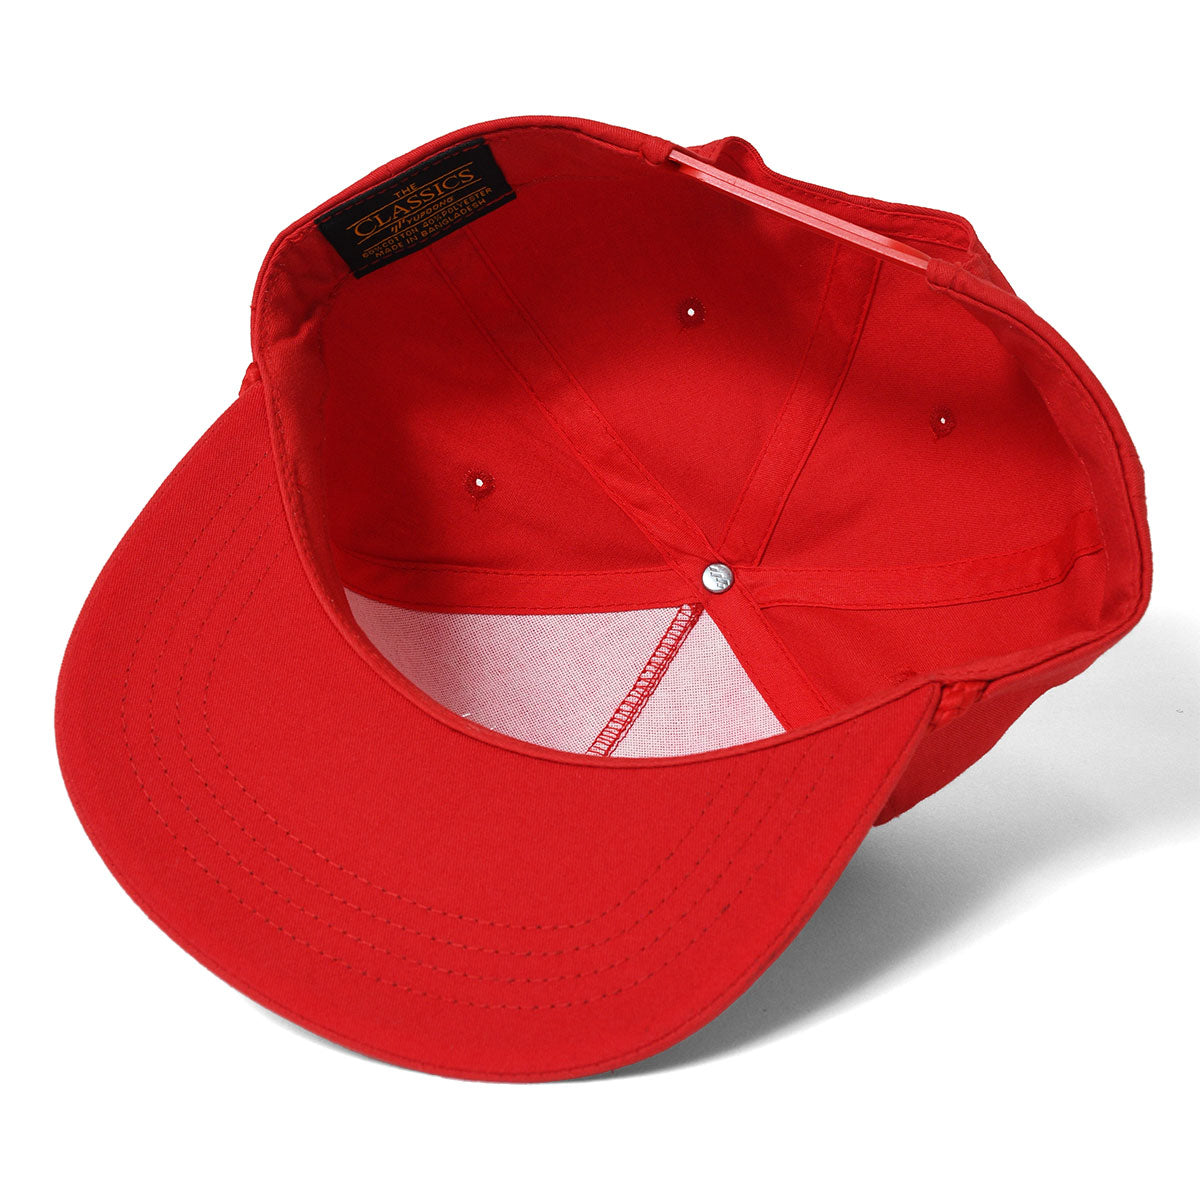 FRANK'S CHOP SHOP OLD ENGLISH LOGO TRUCK CAP  (RED)